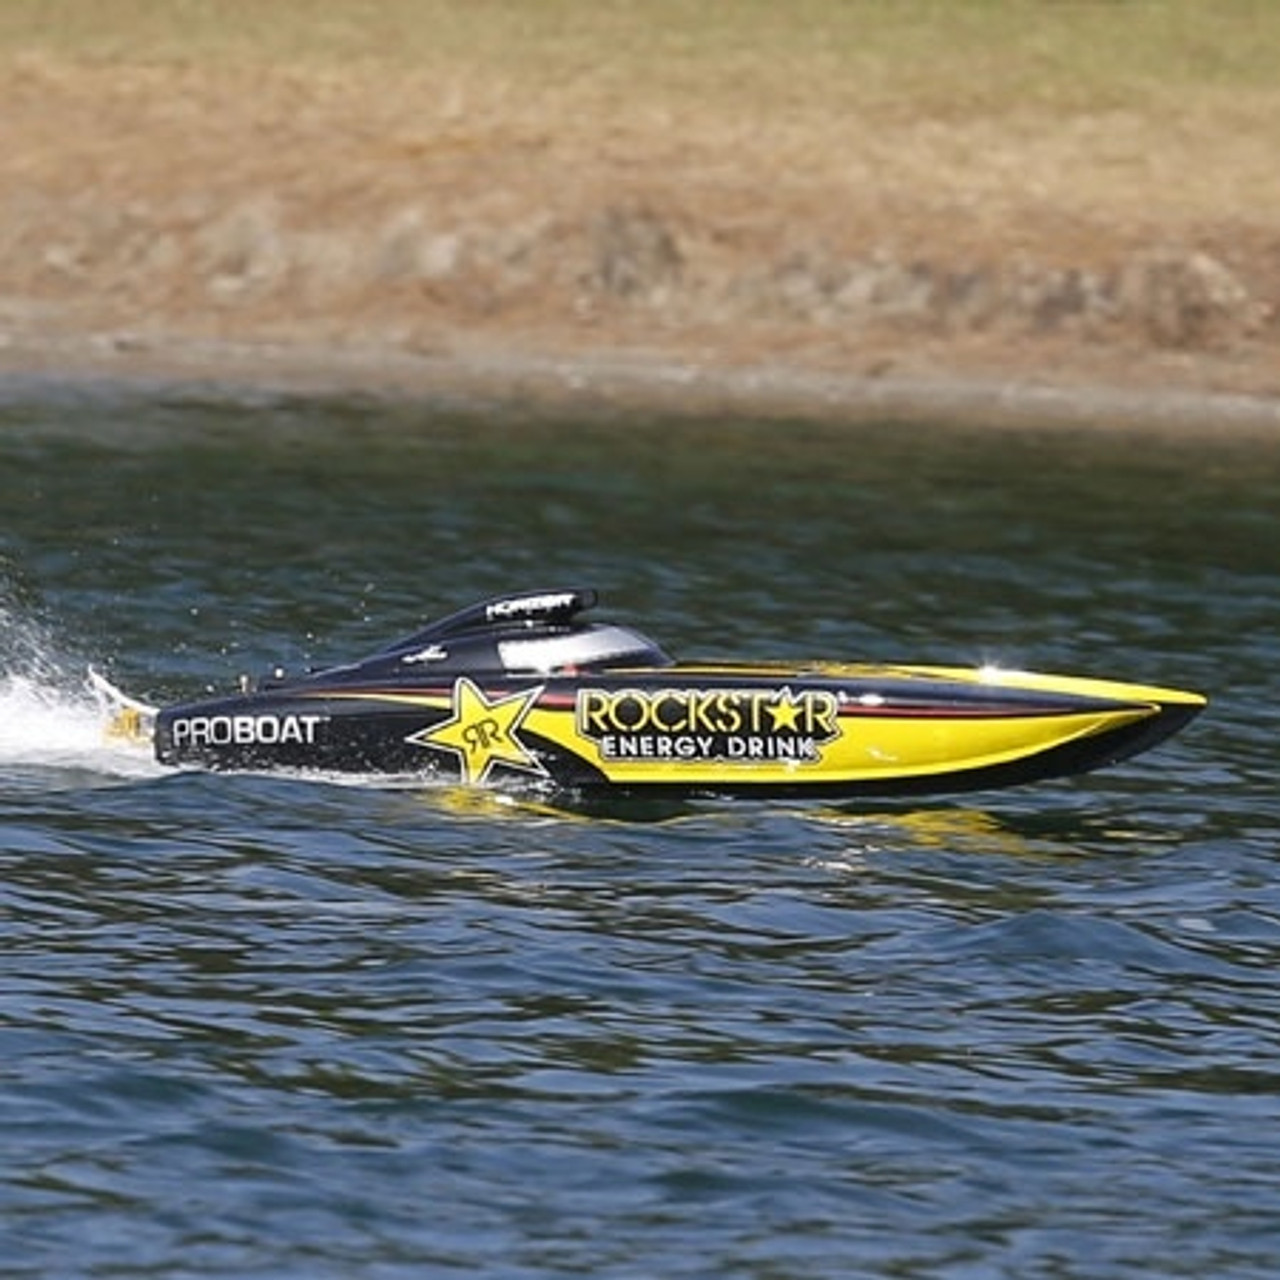 rtr gas powered rc boats